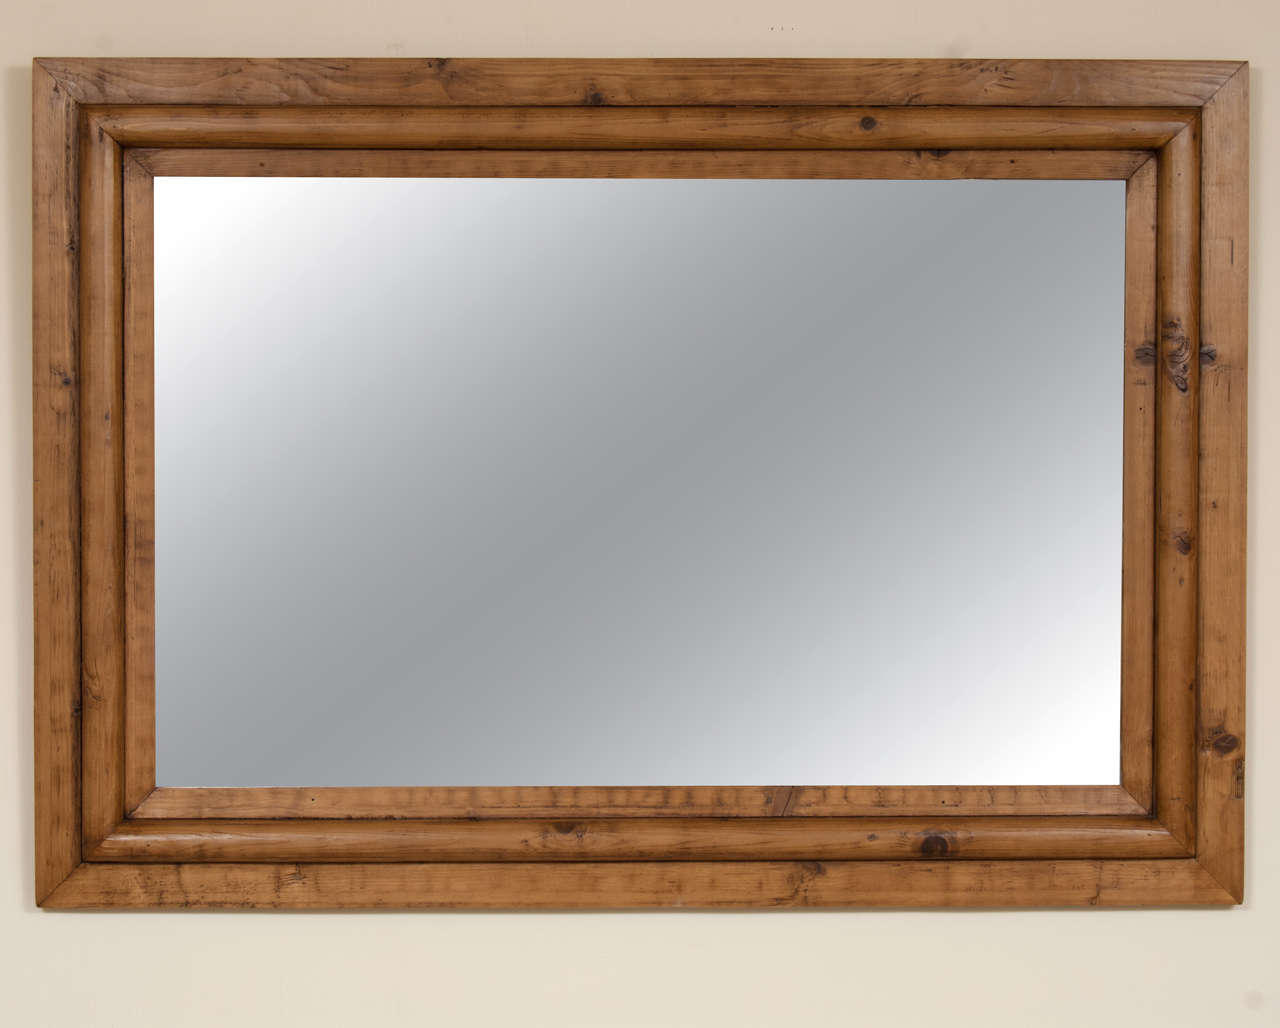 An unusually large and bold hard-to-find original antique pine mirror frame with replaced mirror glass.